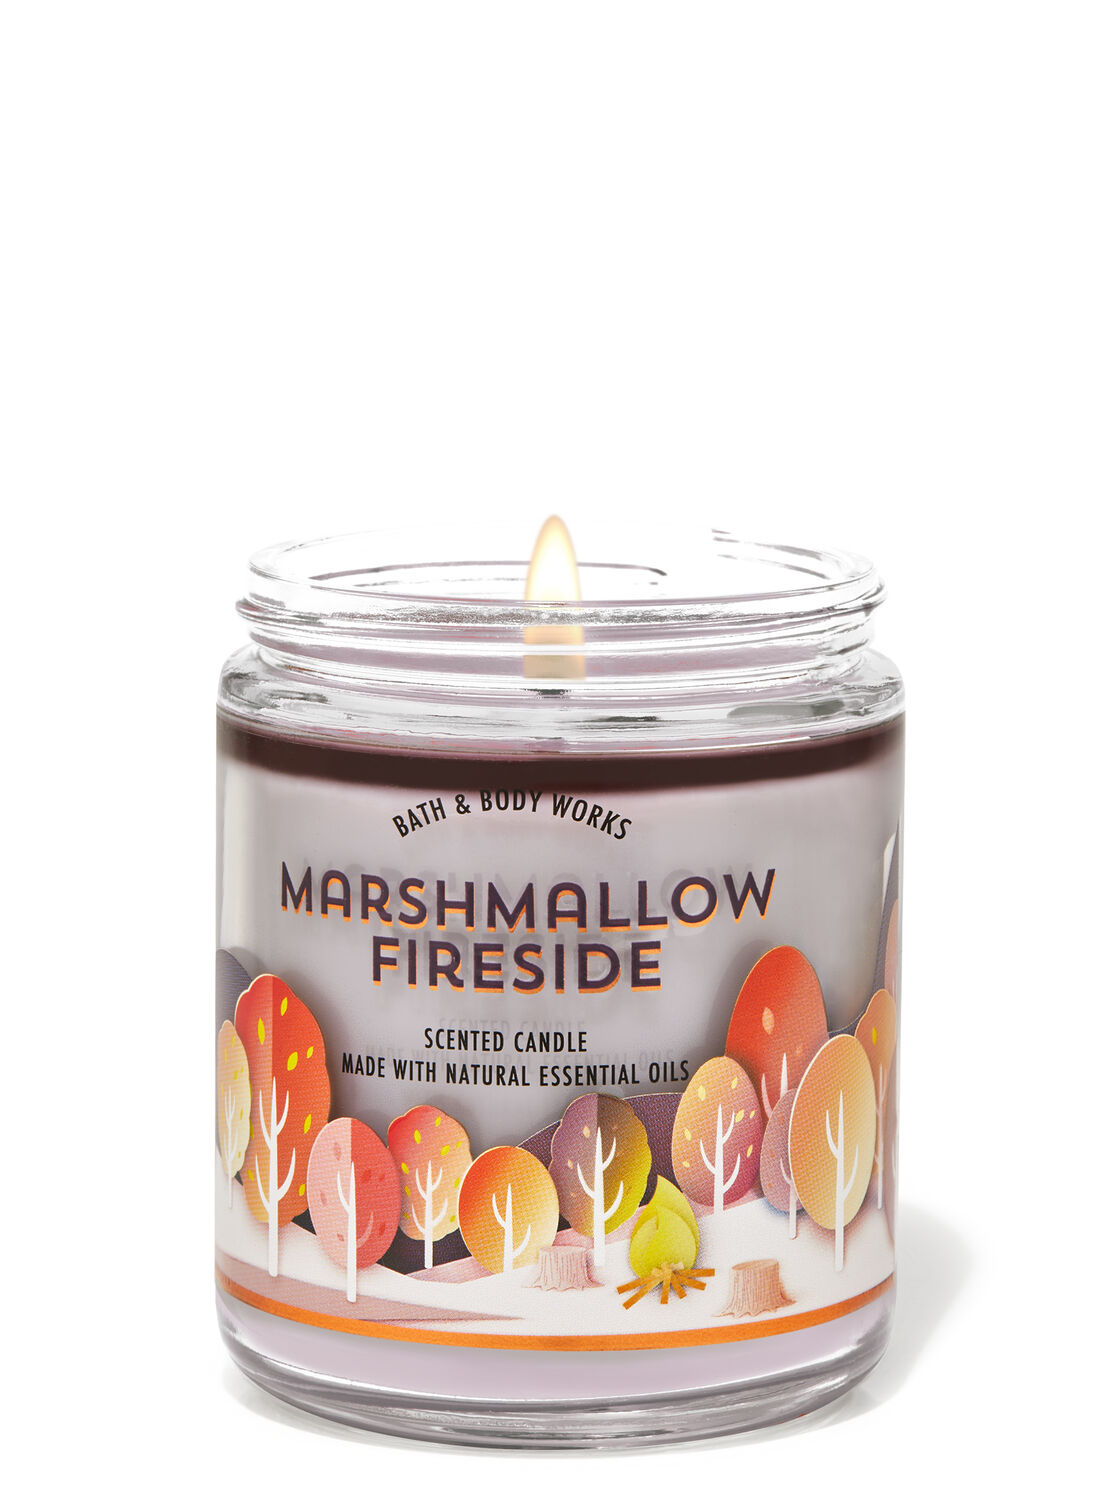 1 Bath & Body Works CAMPFIRE PUMPKIN Large 3-Wick Scented Candle 14.5 oz 